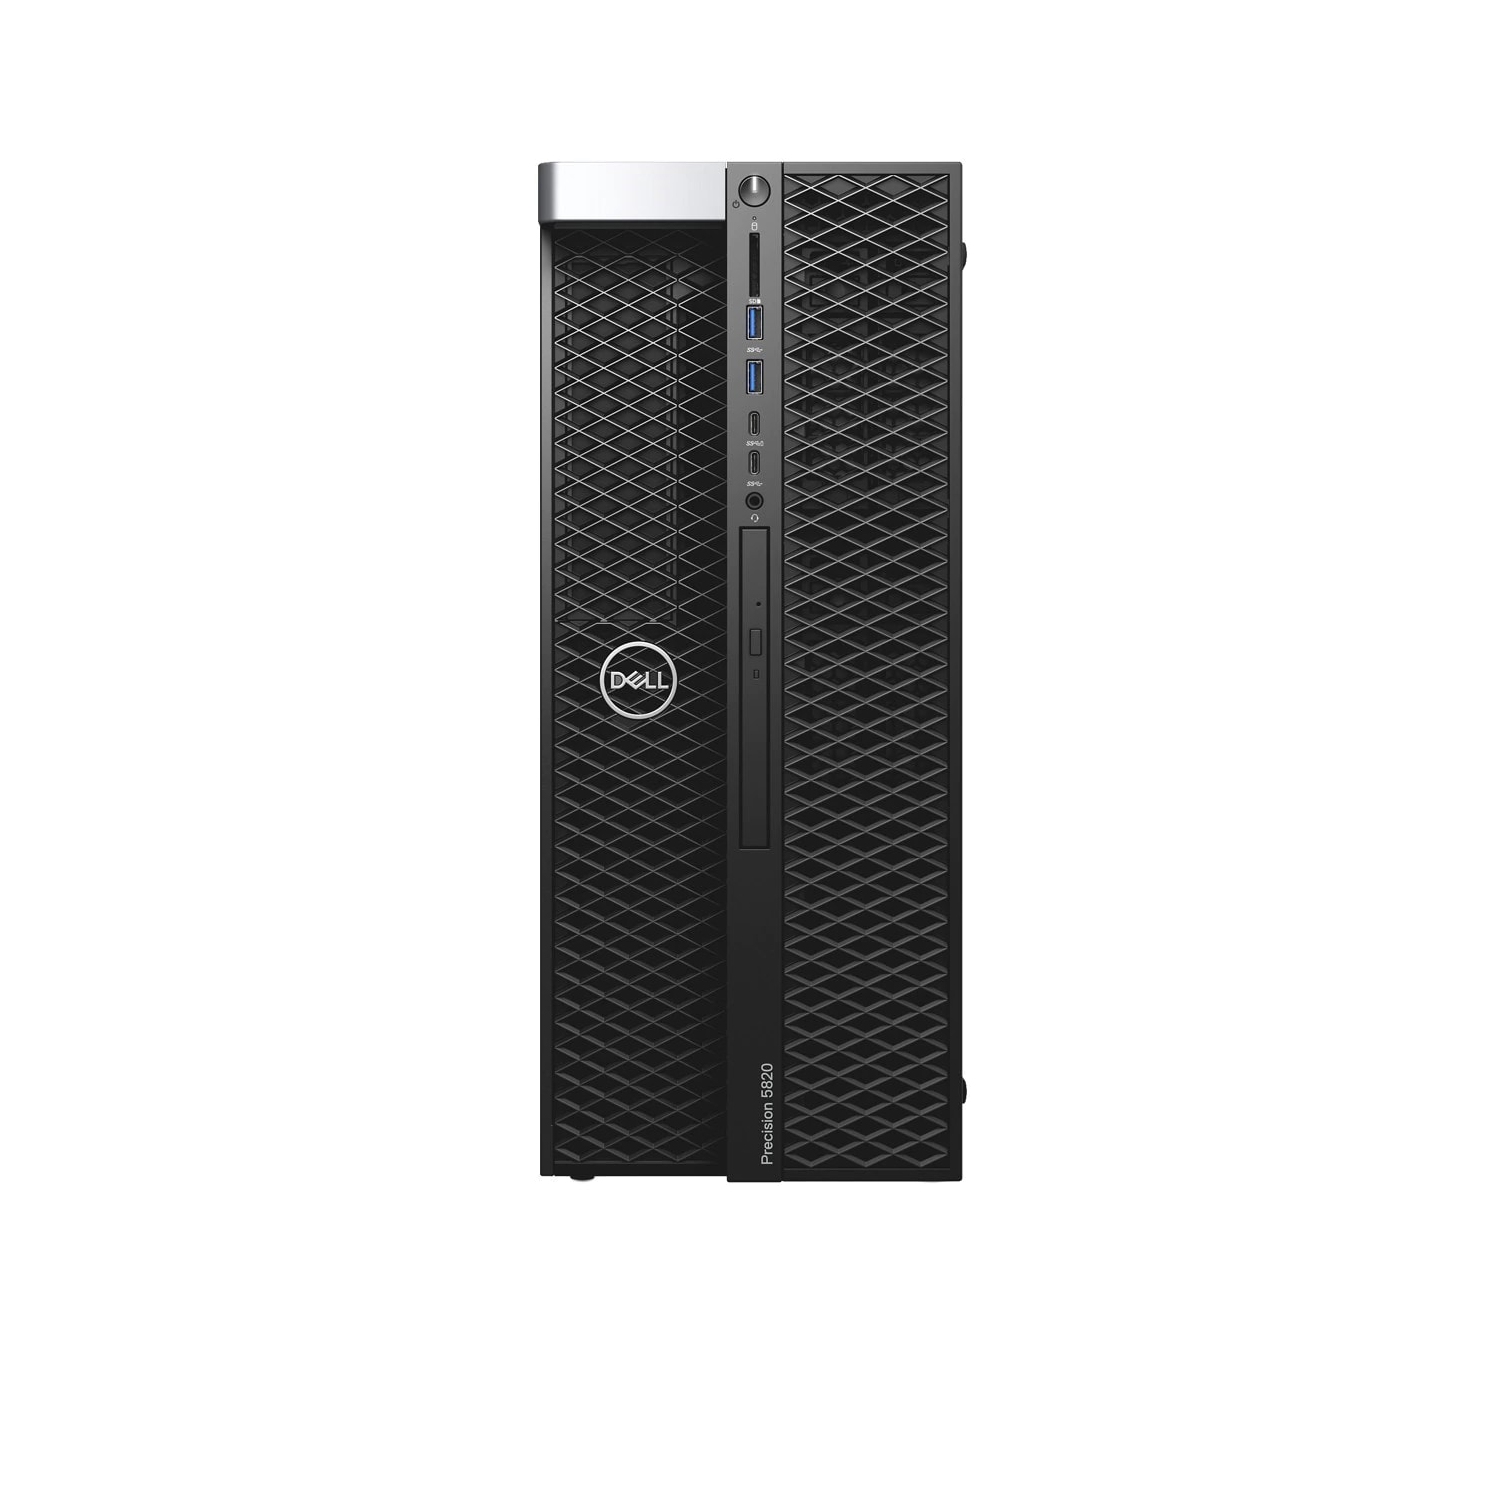 Refurbished (Excellent) - Dell Precision T5820 Workstation Desktop (2018) | Core Xeon W - 1TB SSD - 64GB RAM - RTX 5000 | 14 Cores @ 4.6 GHz Certified Refurbished